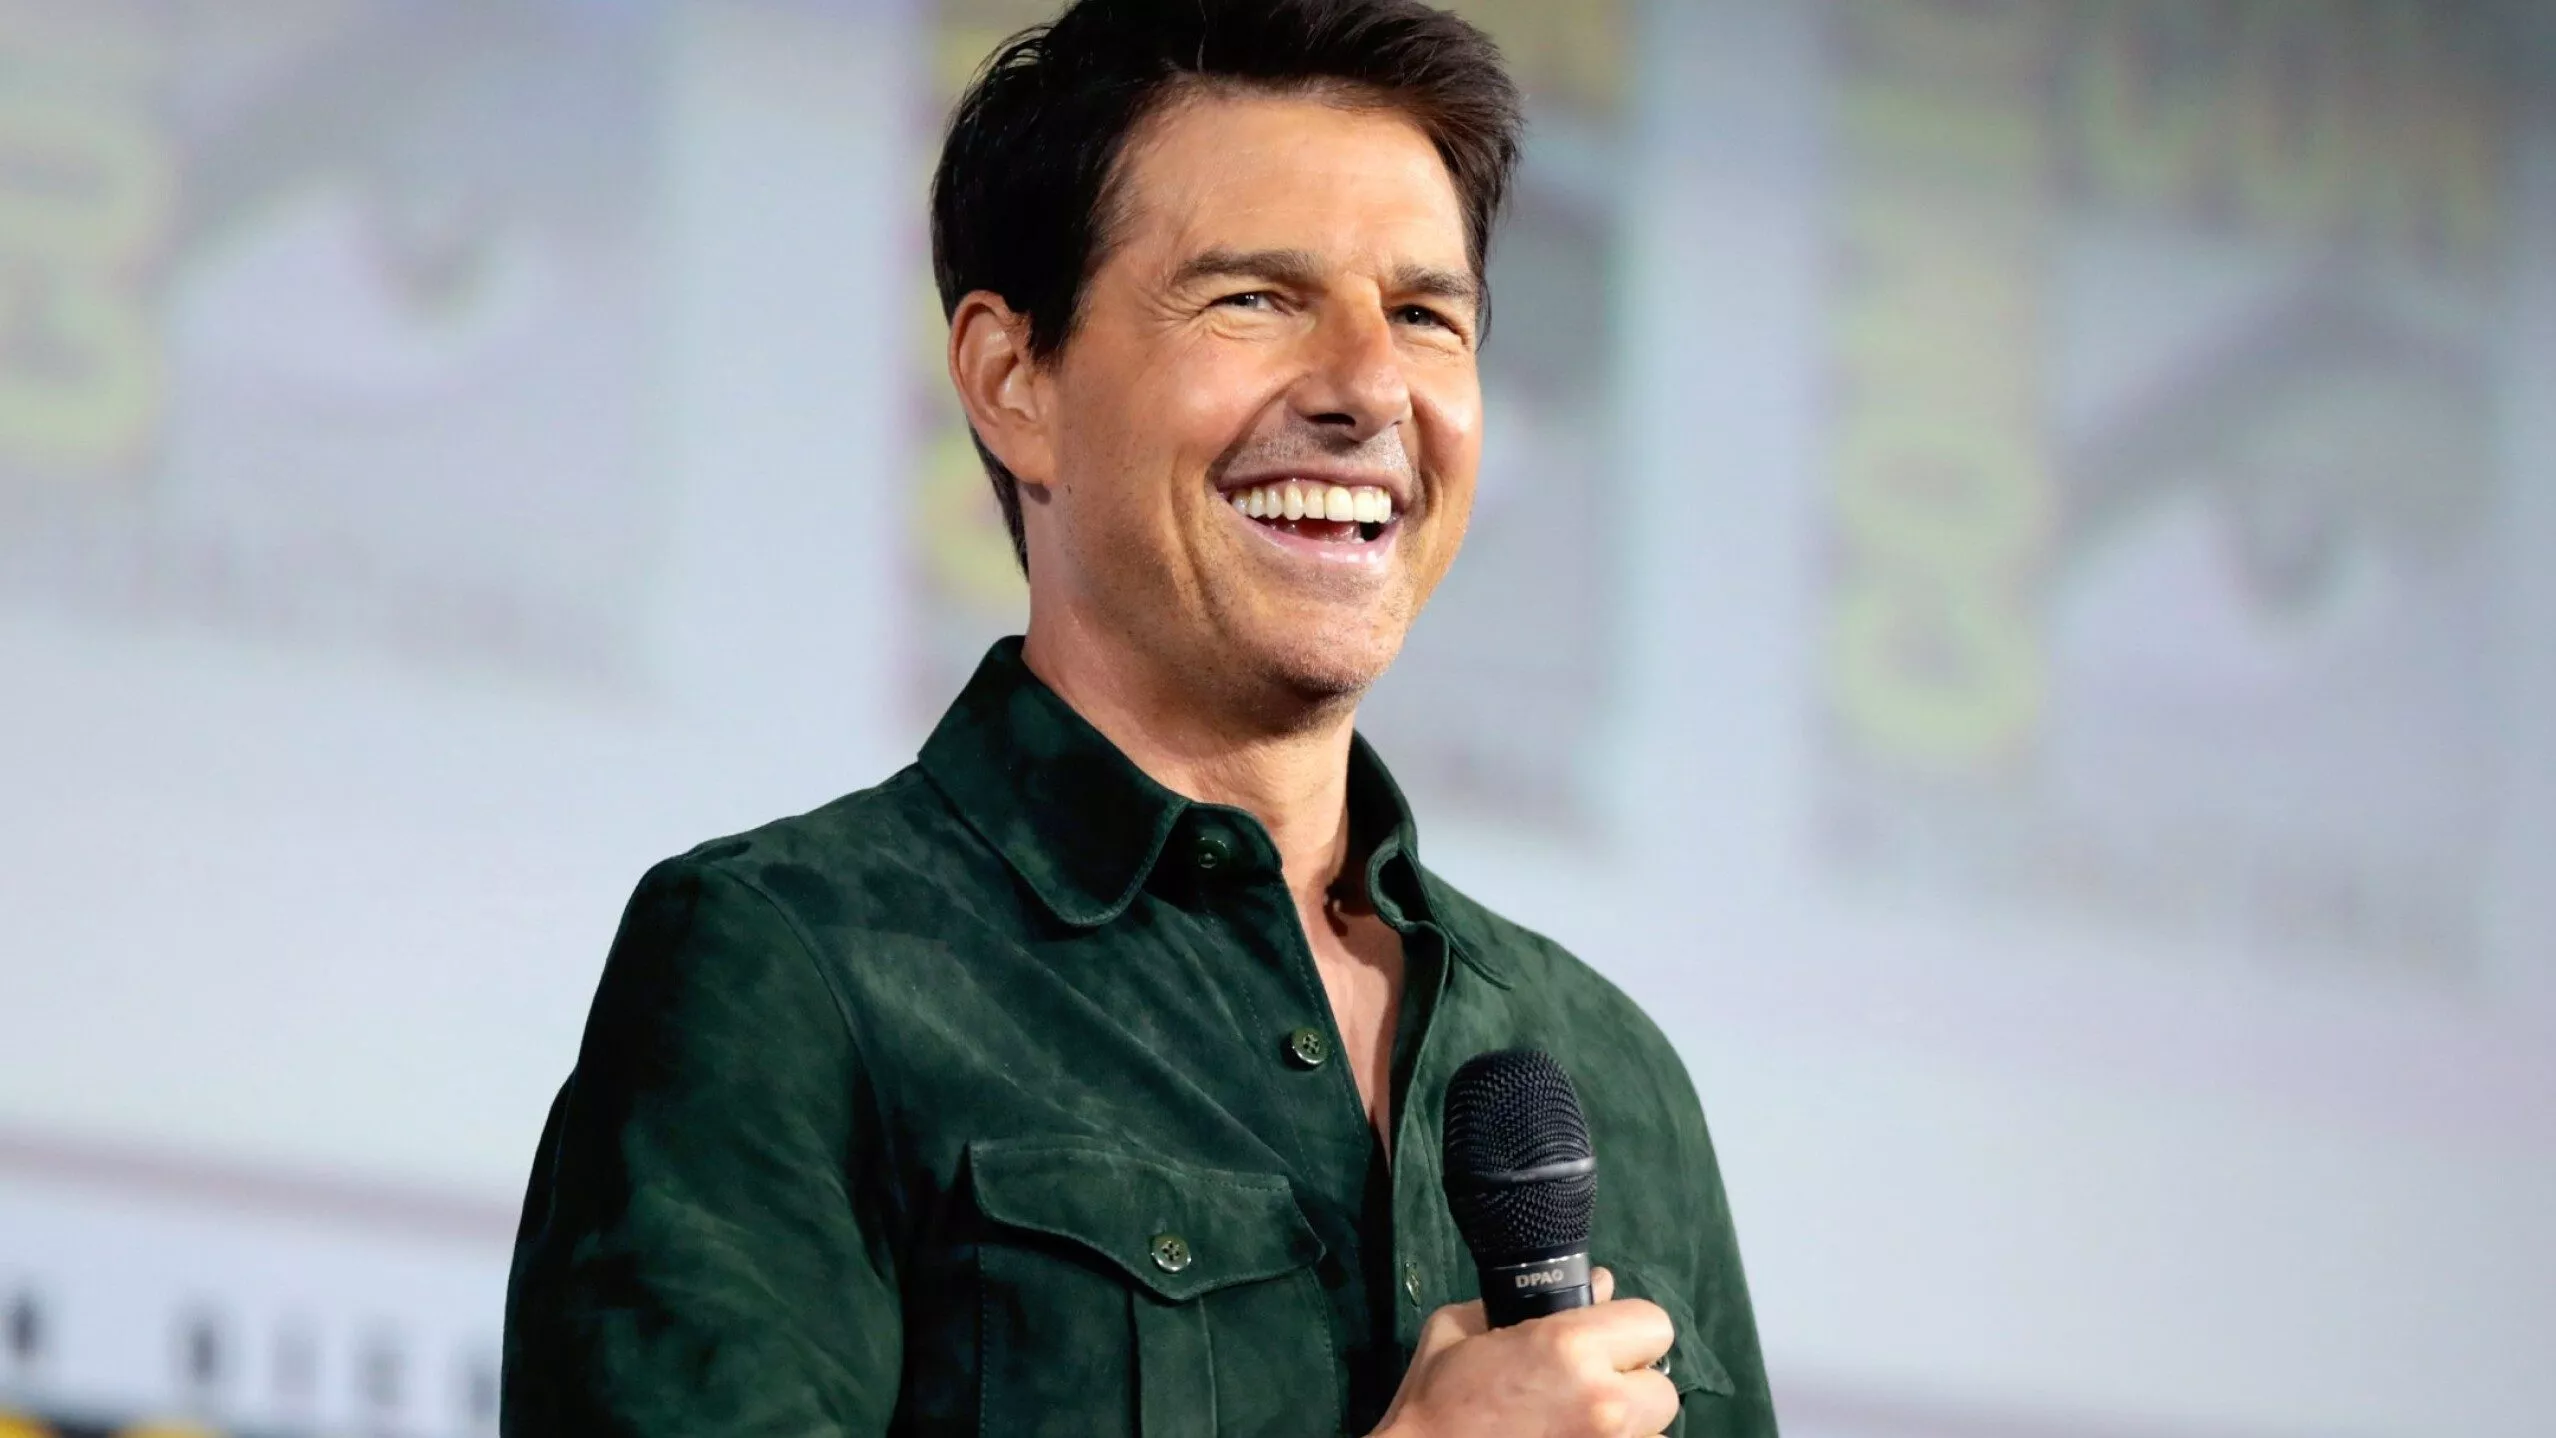 Tom Cruise - For evigt ung DR TV